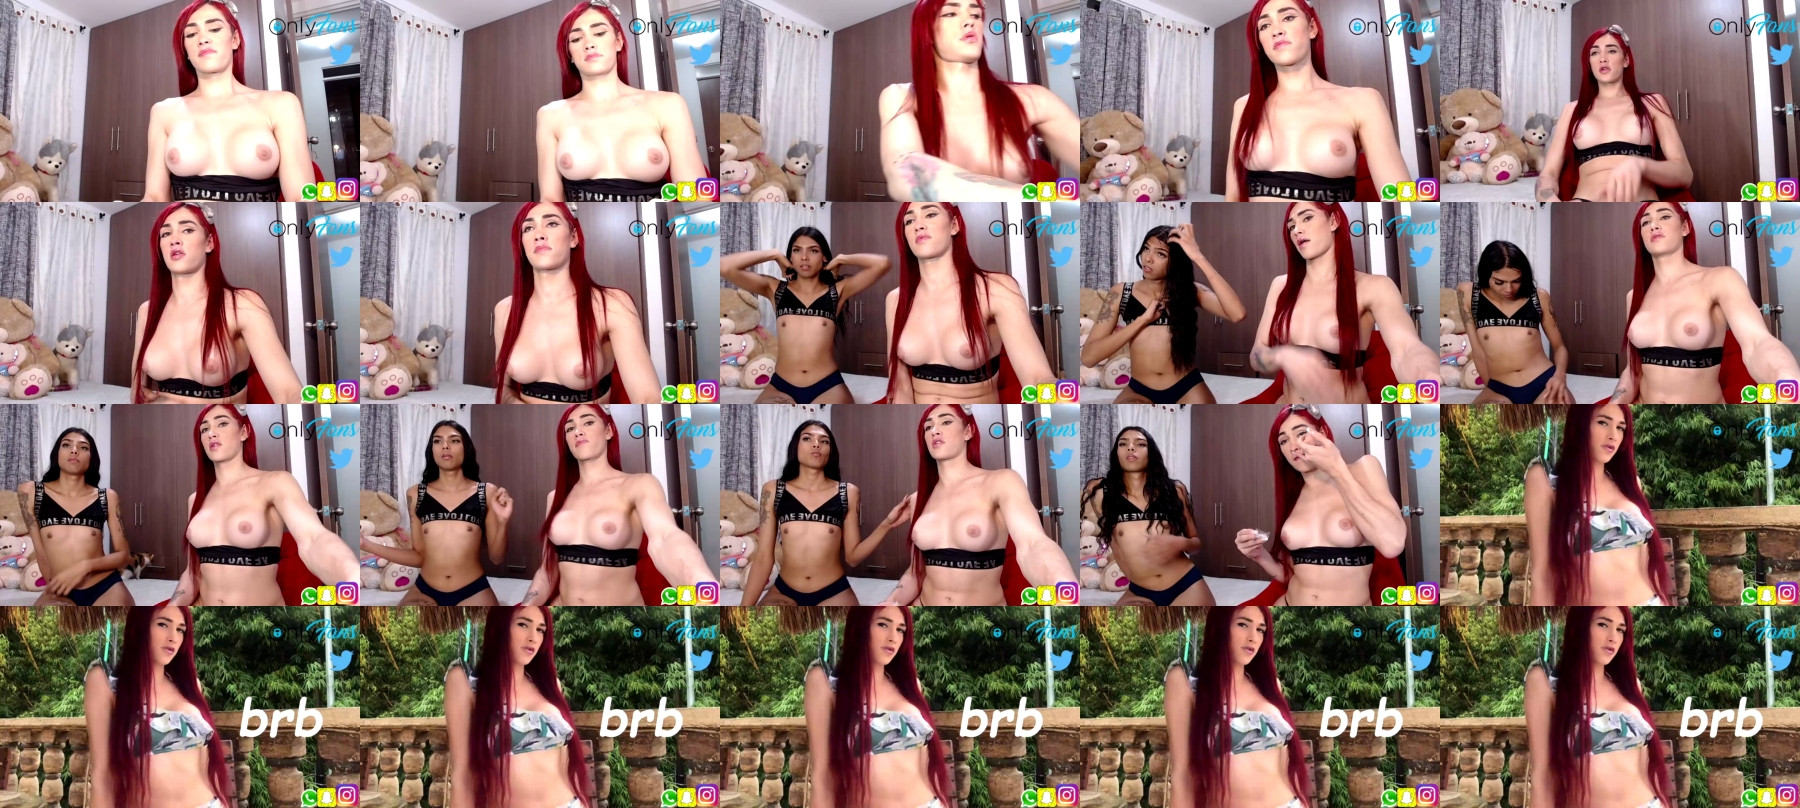 Beauty_Dulcemaria  01-07-2021 Trans Topless